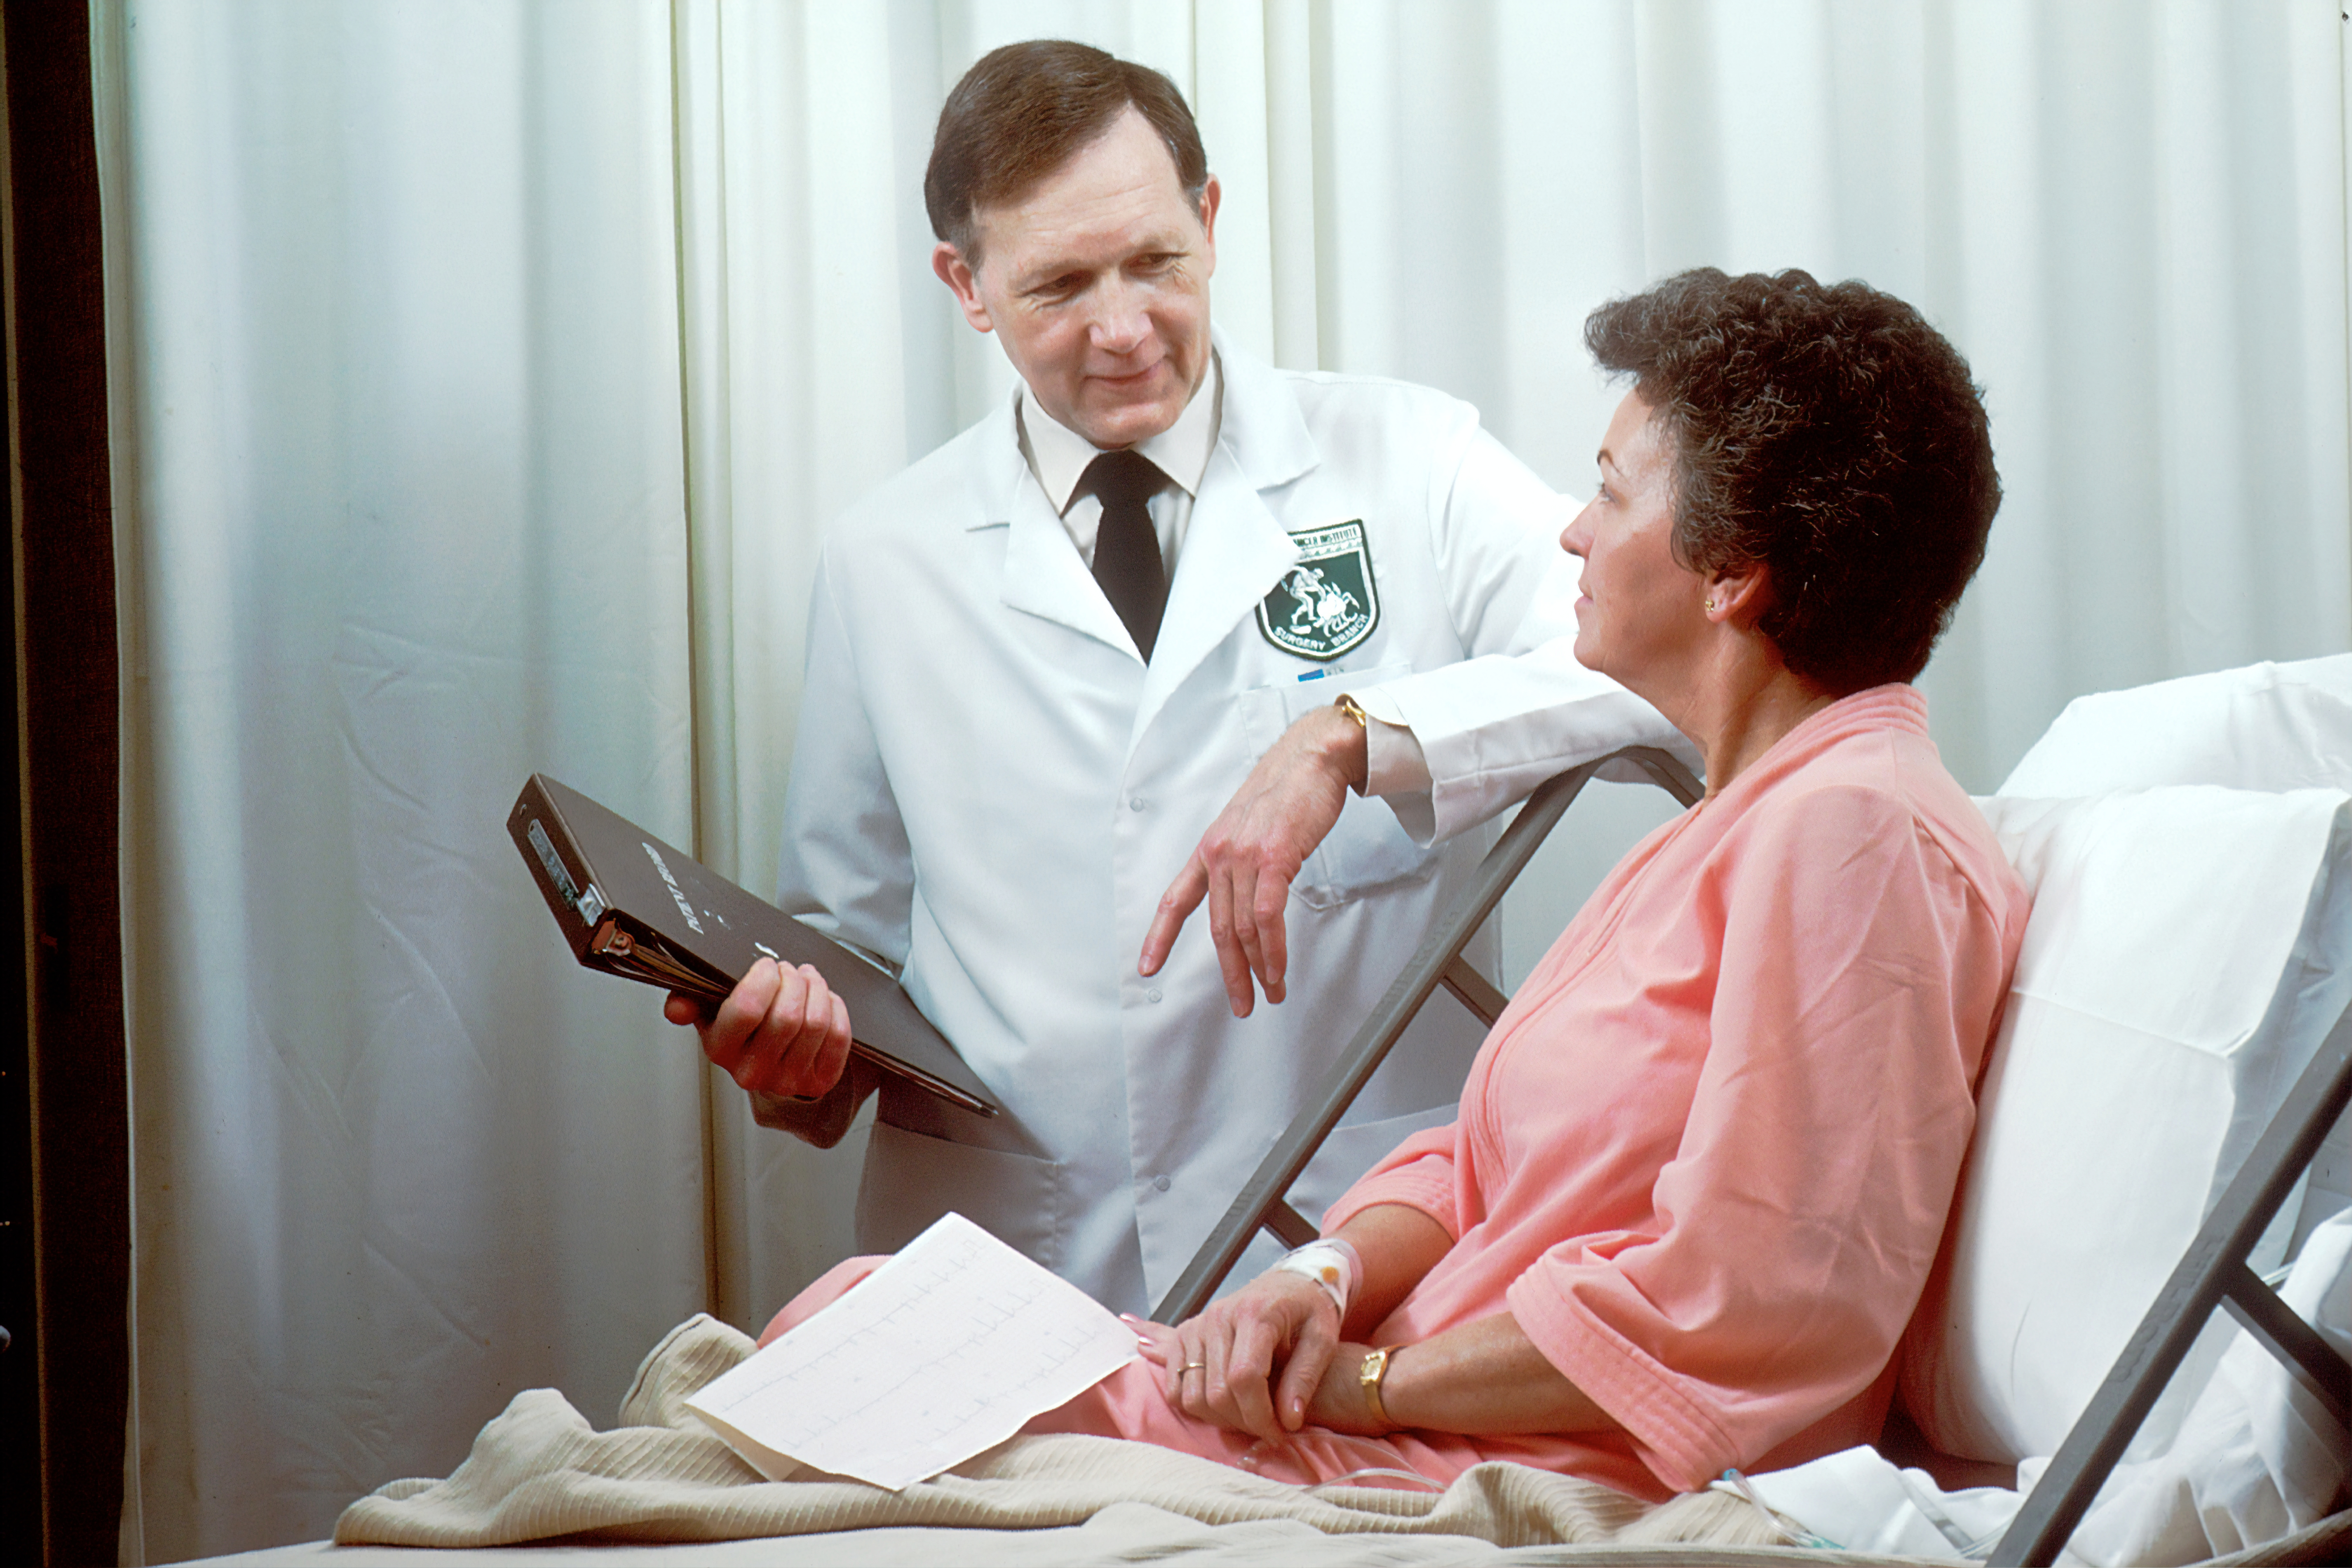 An elderly female patient sitting upright in a hospital bed; a physician is standing next to the bed, listening to her speak.